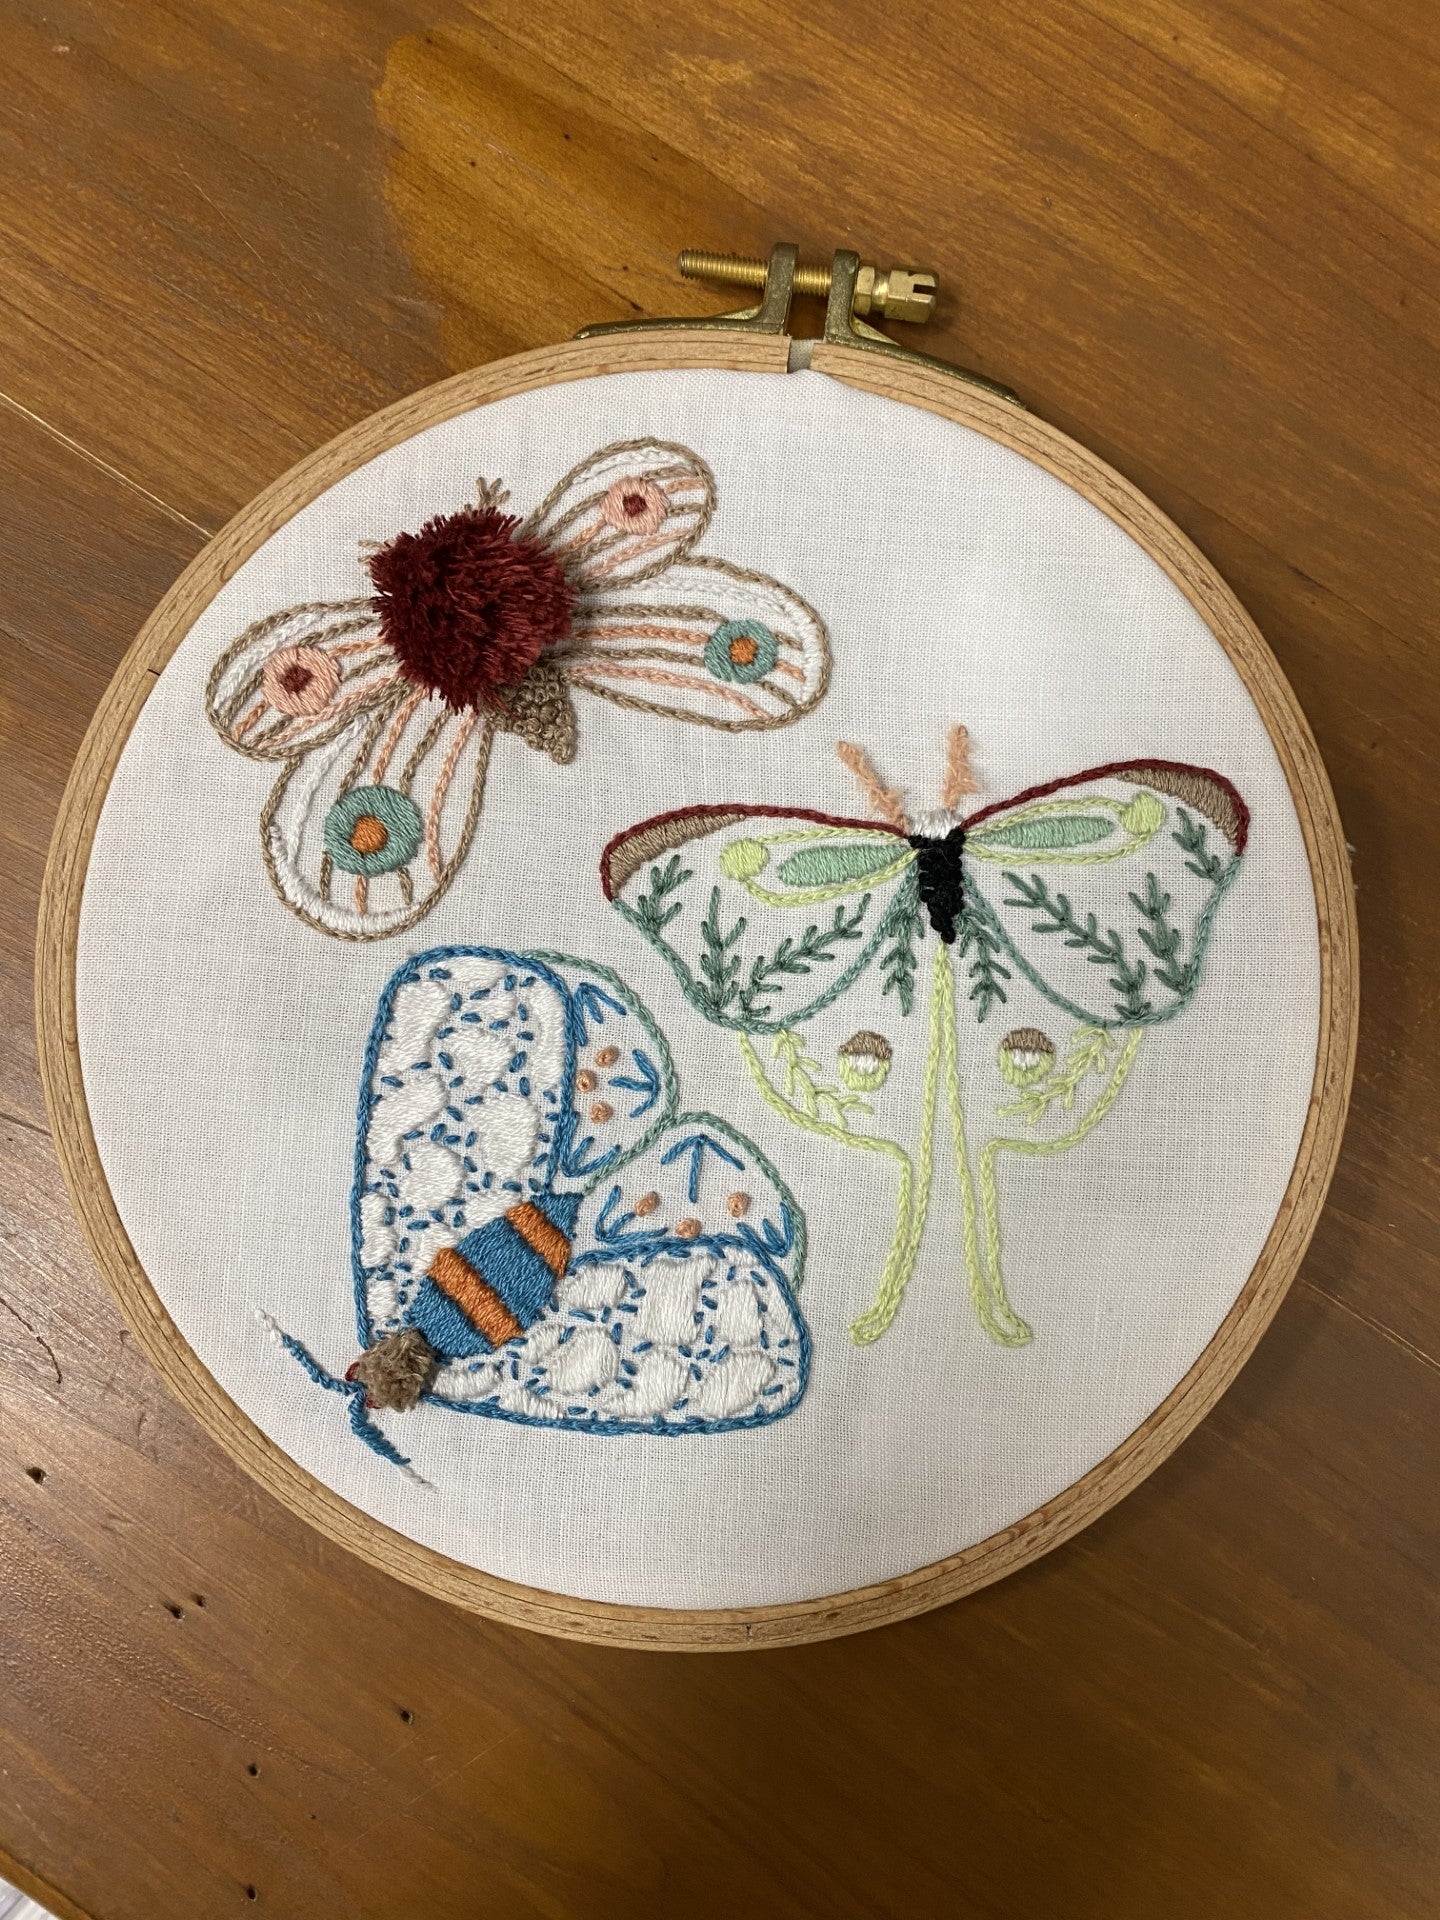 Mcreativej Moths - Peel Stick and Stitch Hand Embroidery Patterns for DIY Crafting